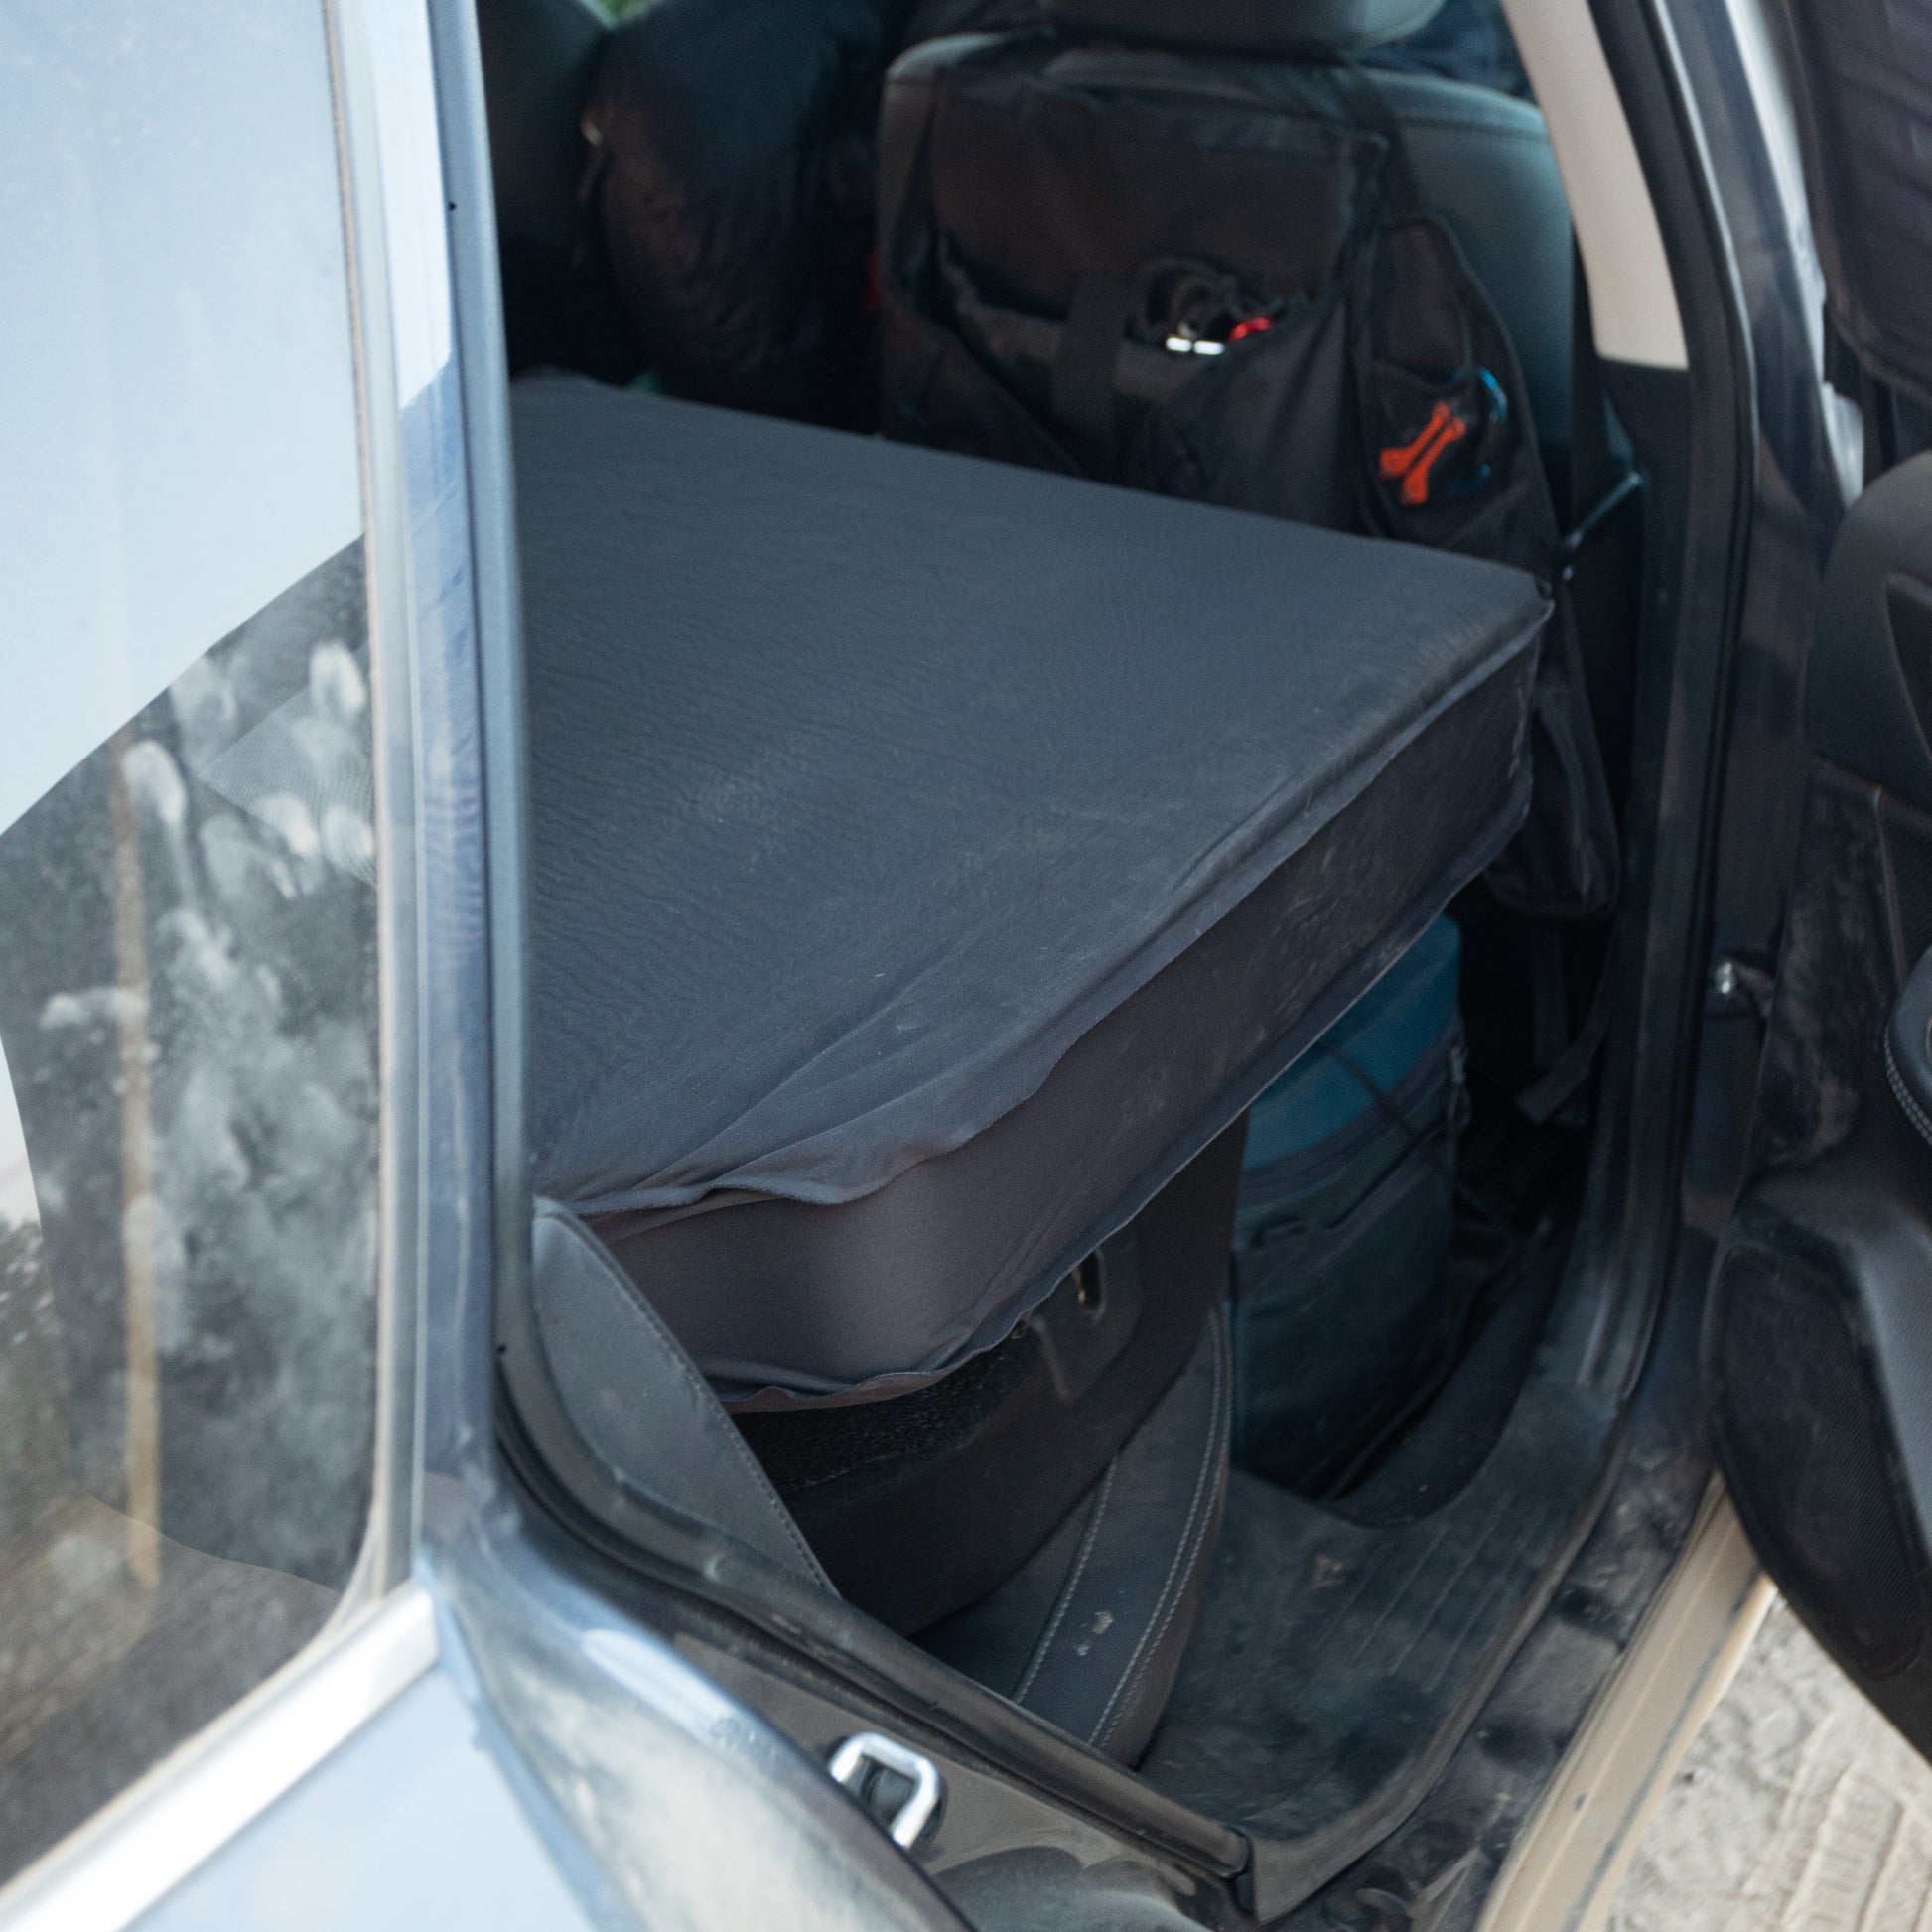 The Deepsleep Solo Mat for Subaru Outback by CarToCamp is open.